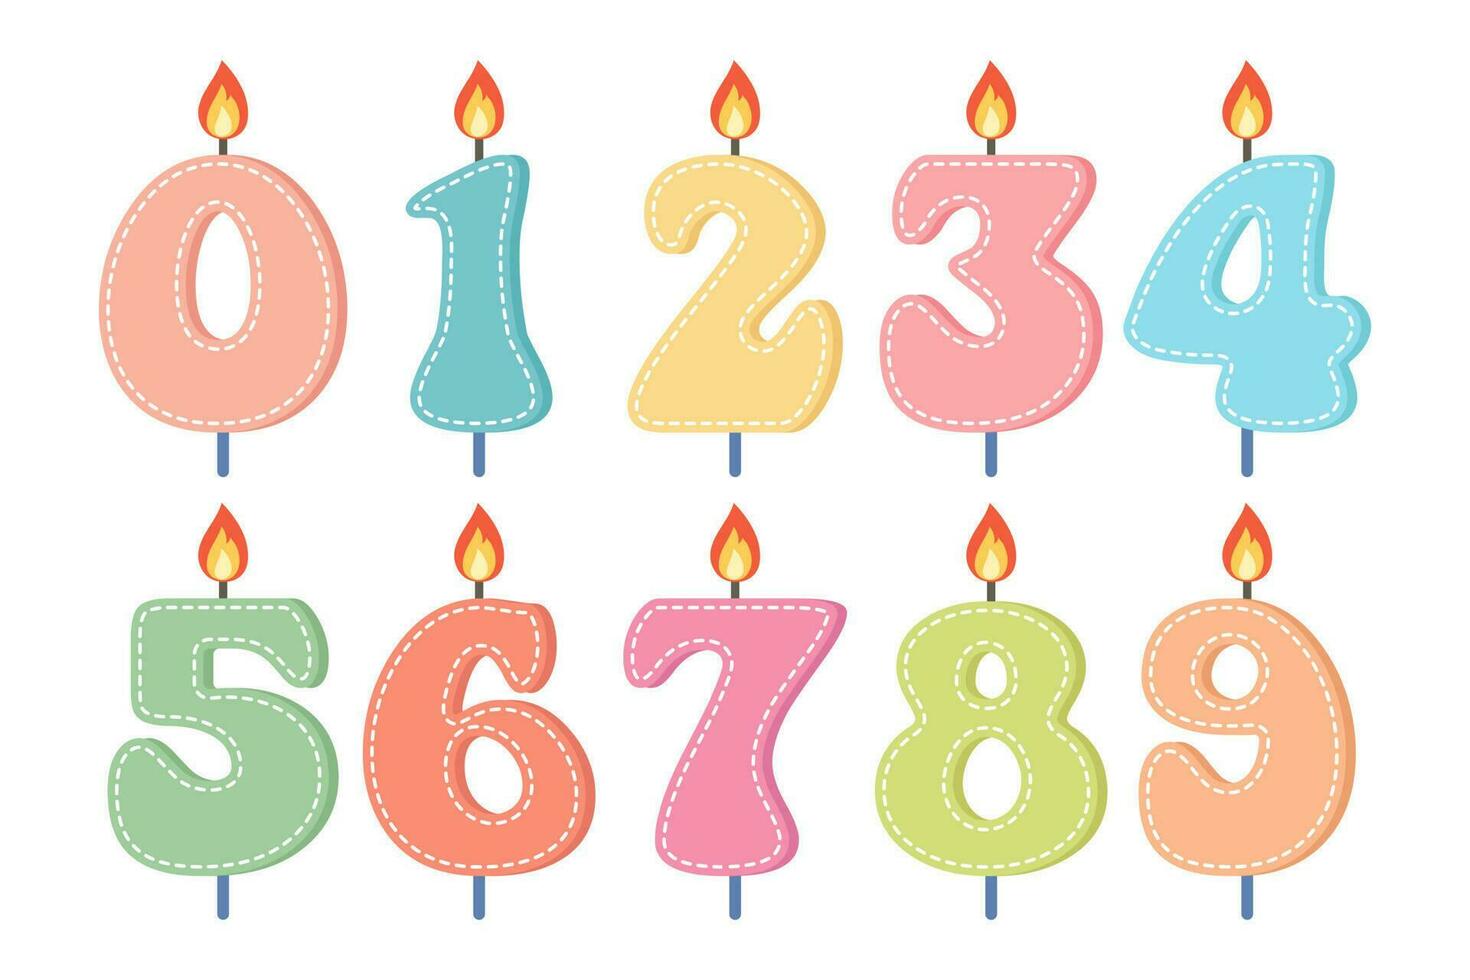 Set of colorful number candles for birthday, cute birthday cake candles. Cake decoration for the holiday. Vector